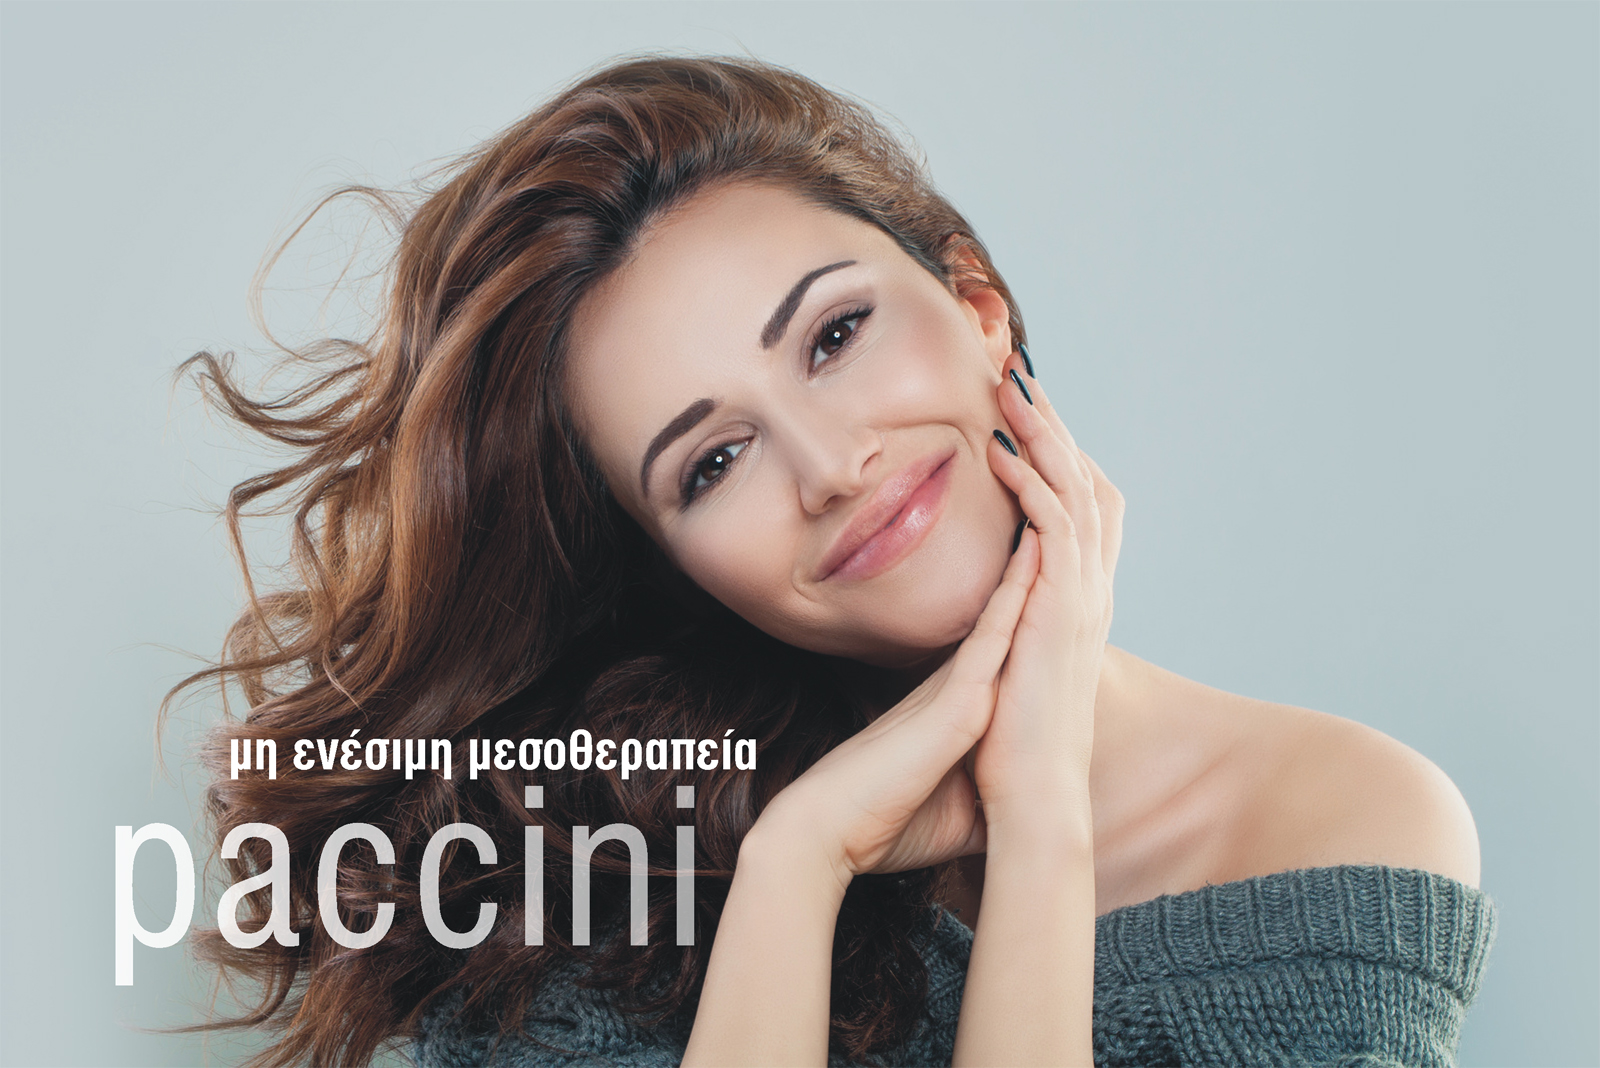 Face Mesotherapy